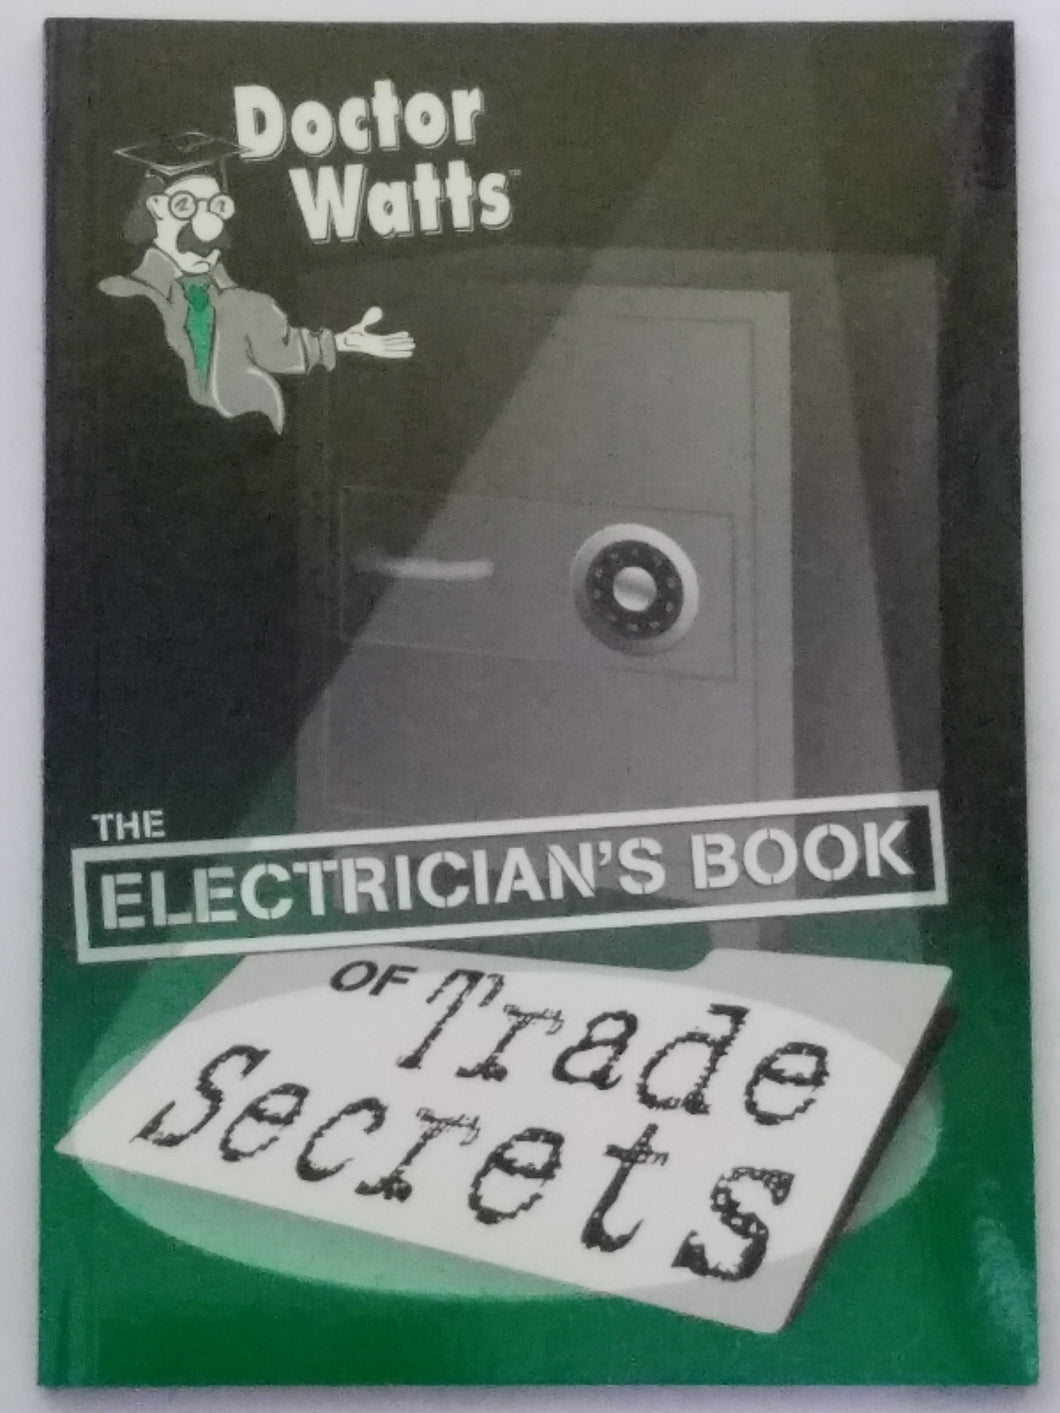 Doctor Watts The Electrician's Book of Trade Secrets